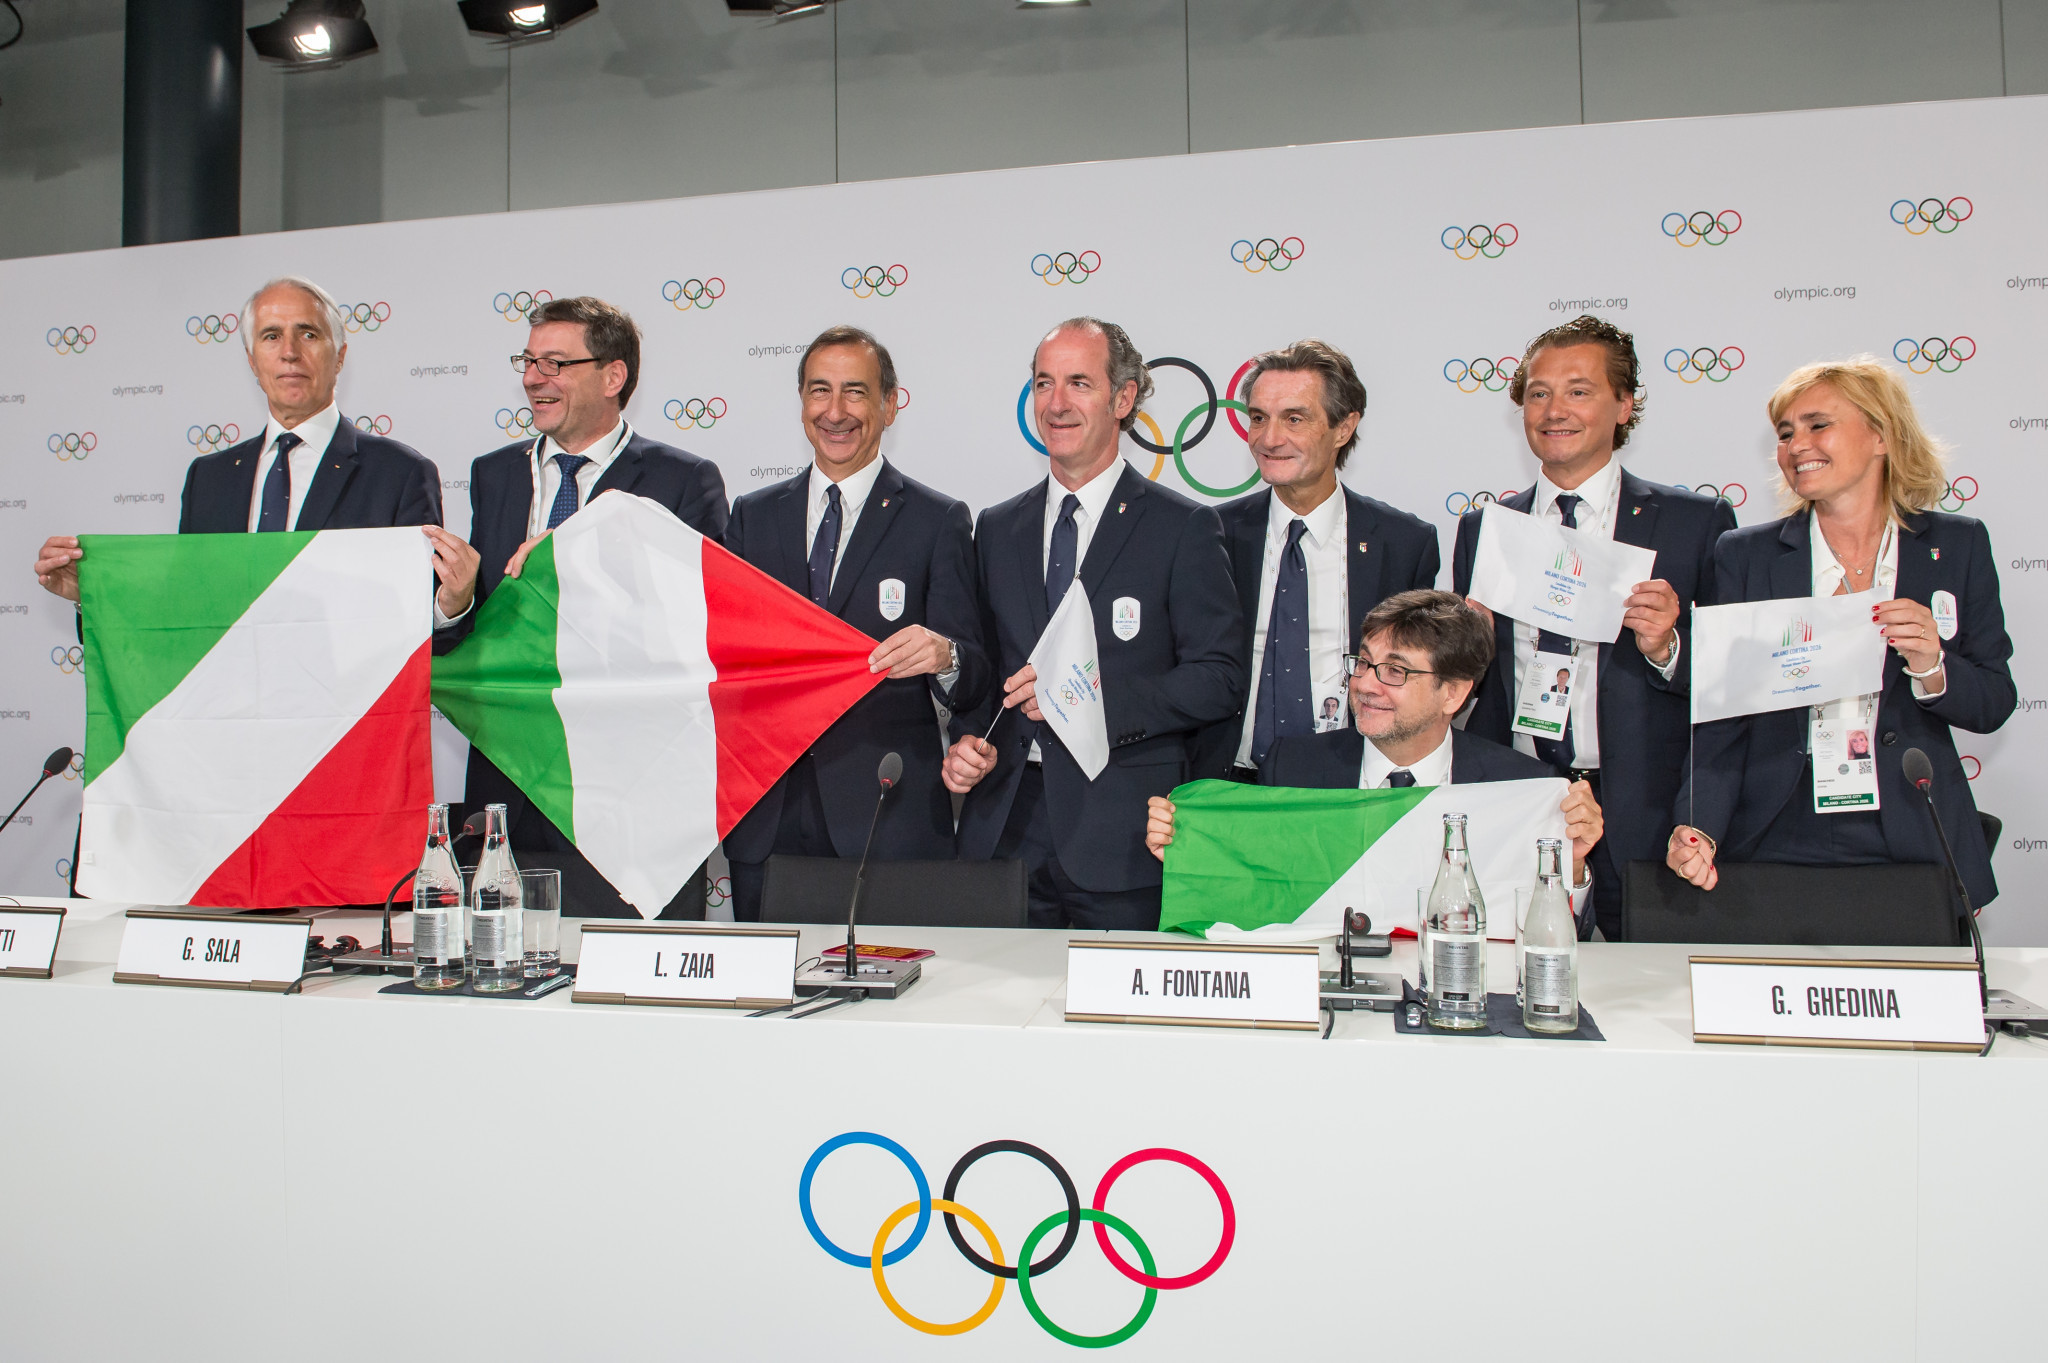 The Italian Parliament has adopted the Olympic law ahead of Milan Cortina 2026 ©Getty Images